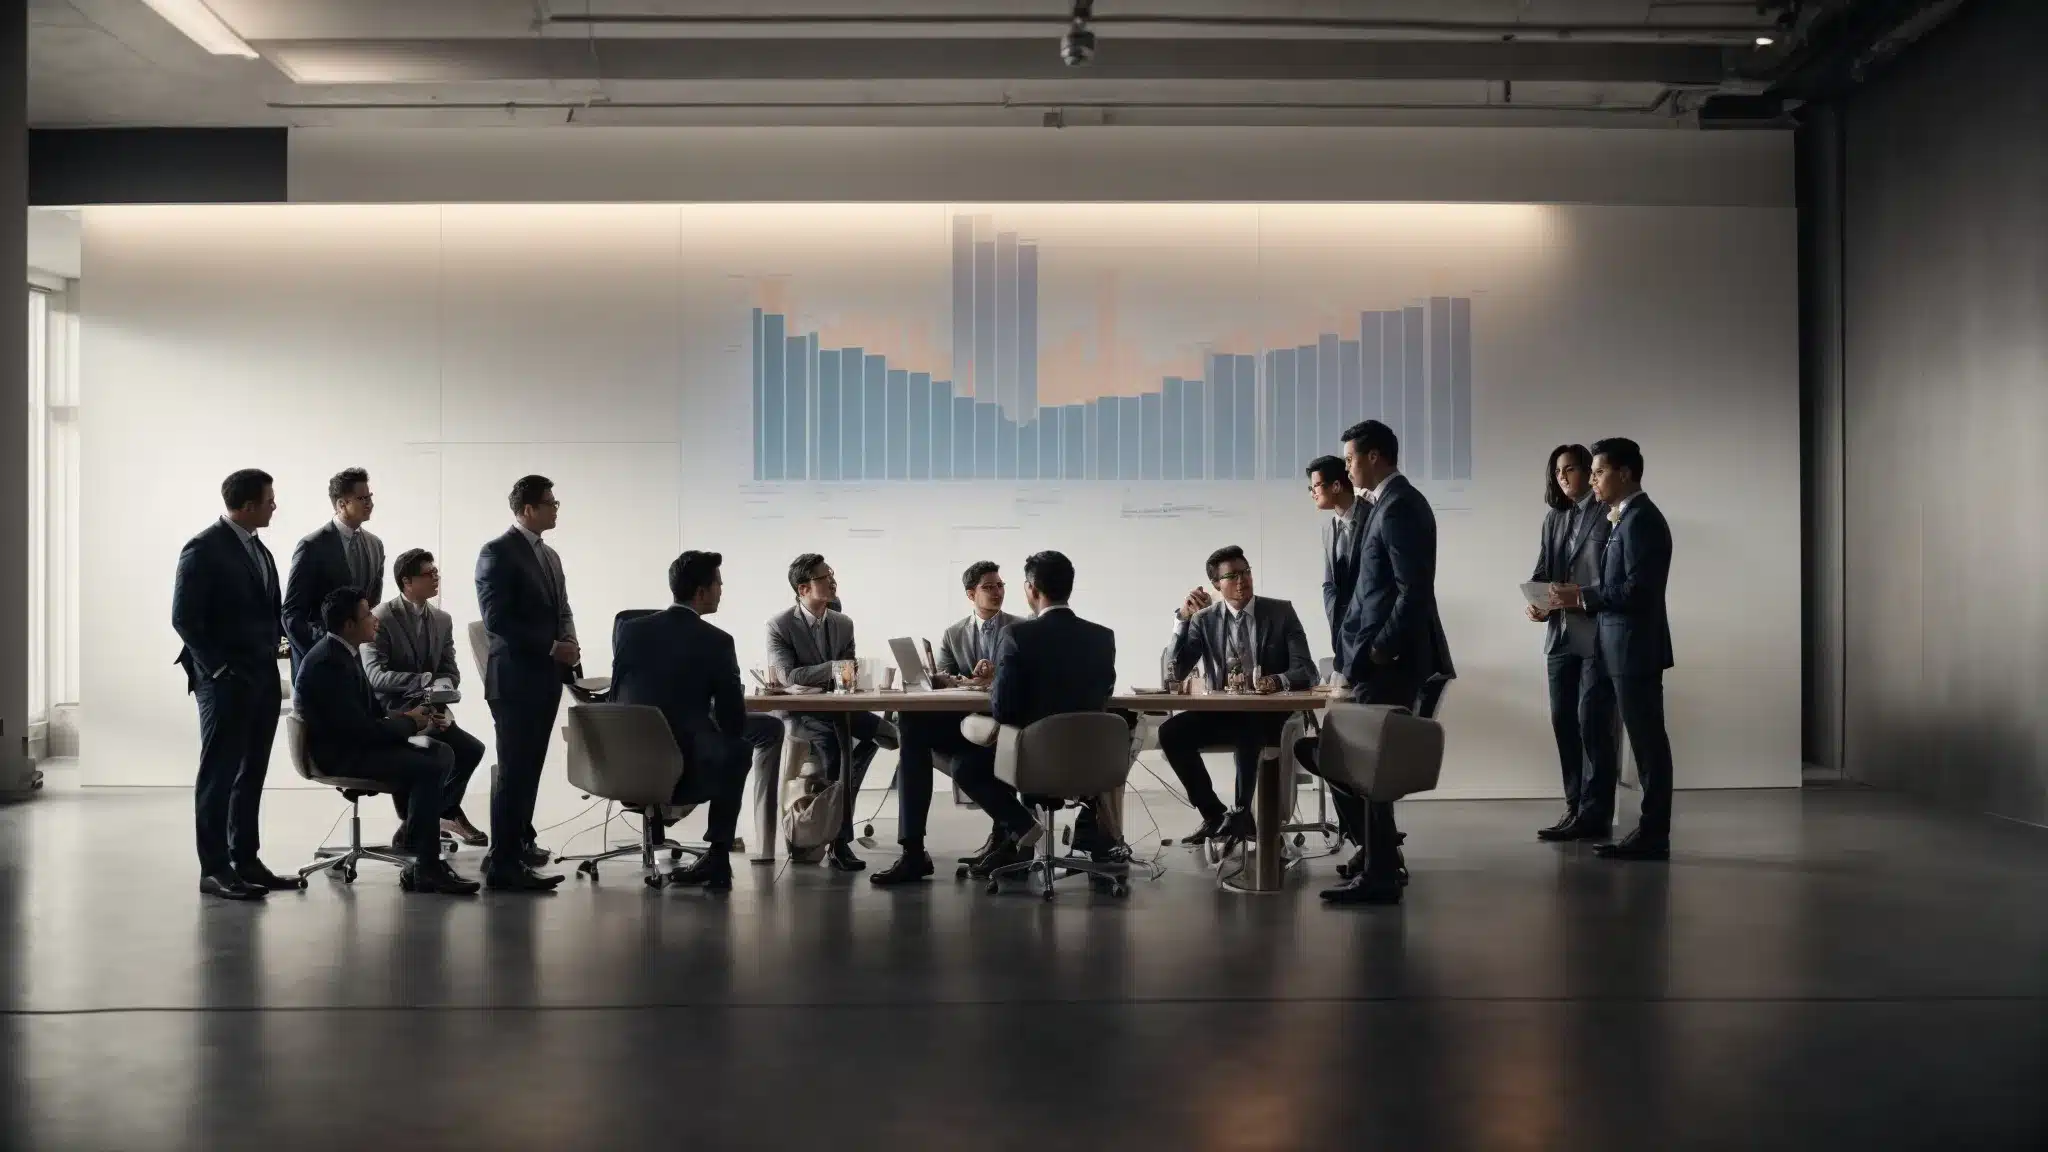 A Team Of Professionals Gathered Around A Table, Brainstorming Ideas With A Clear Projection Of A Growing Sales Graph On The Wall.